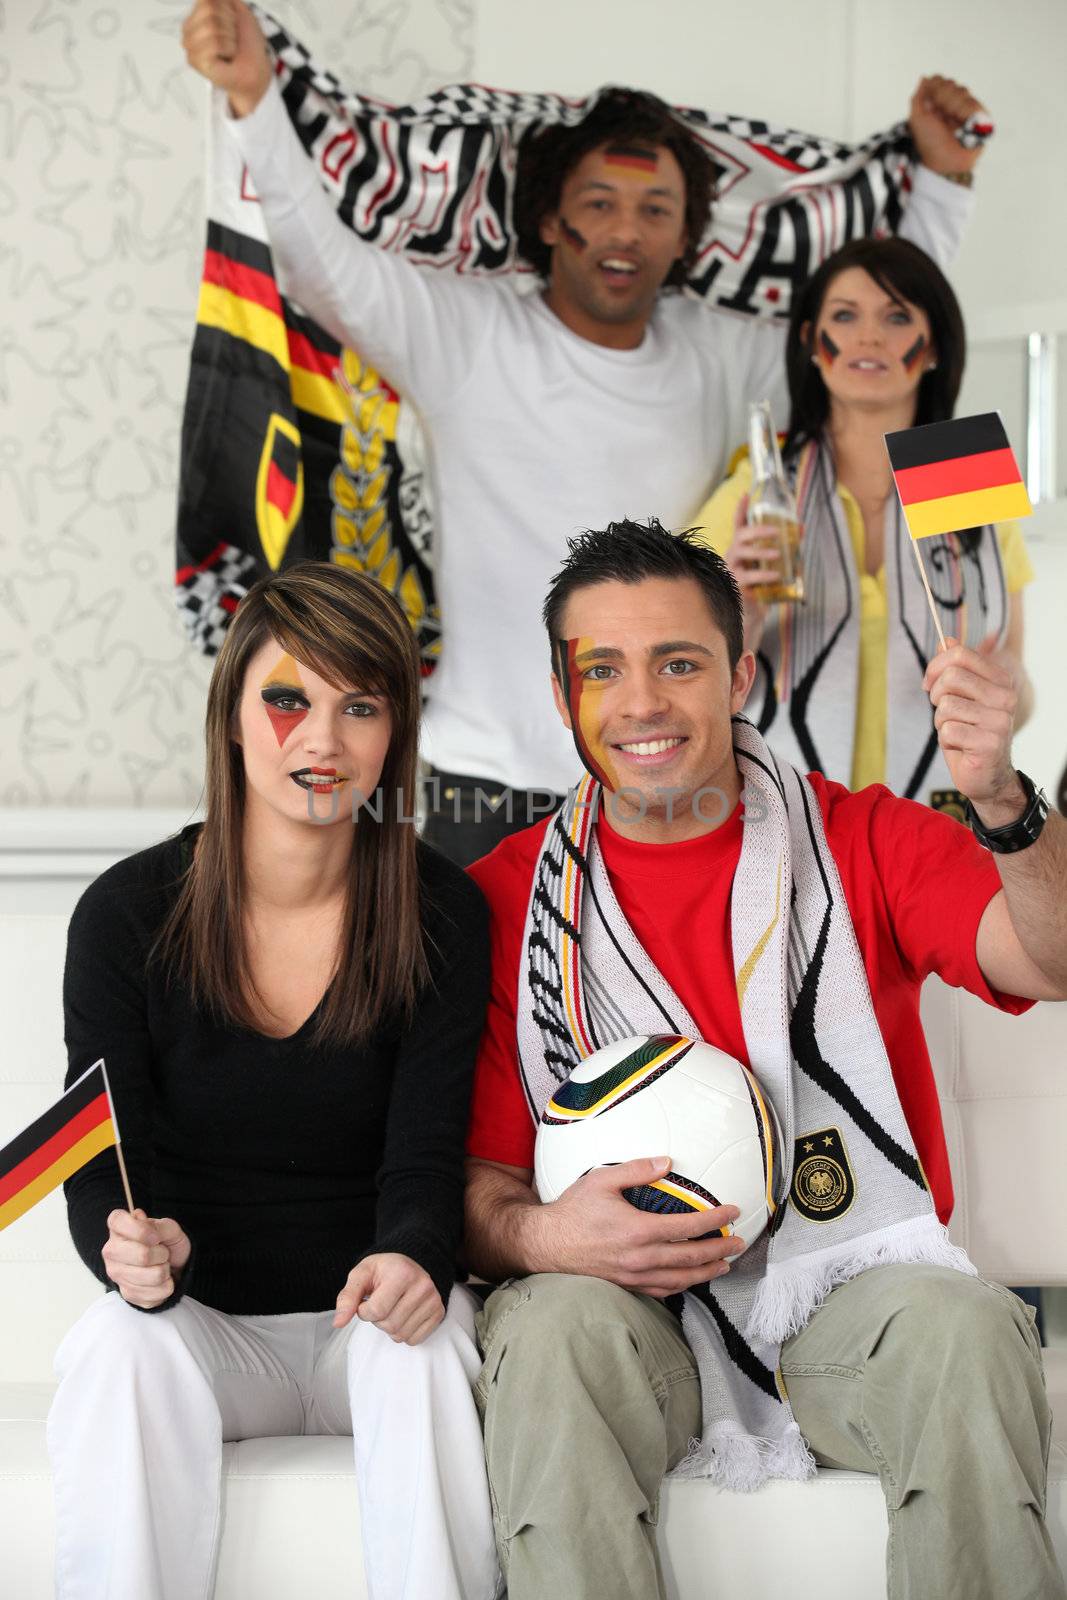 Group of German soccer supporters by phovoir